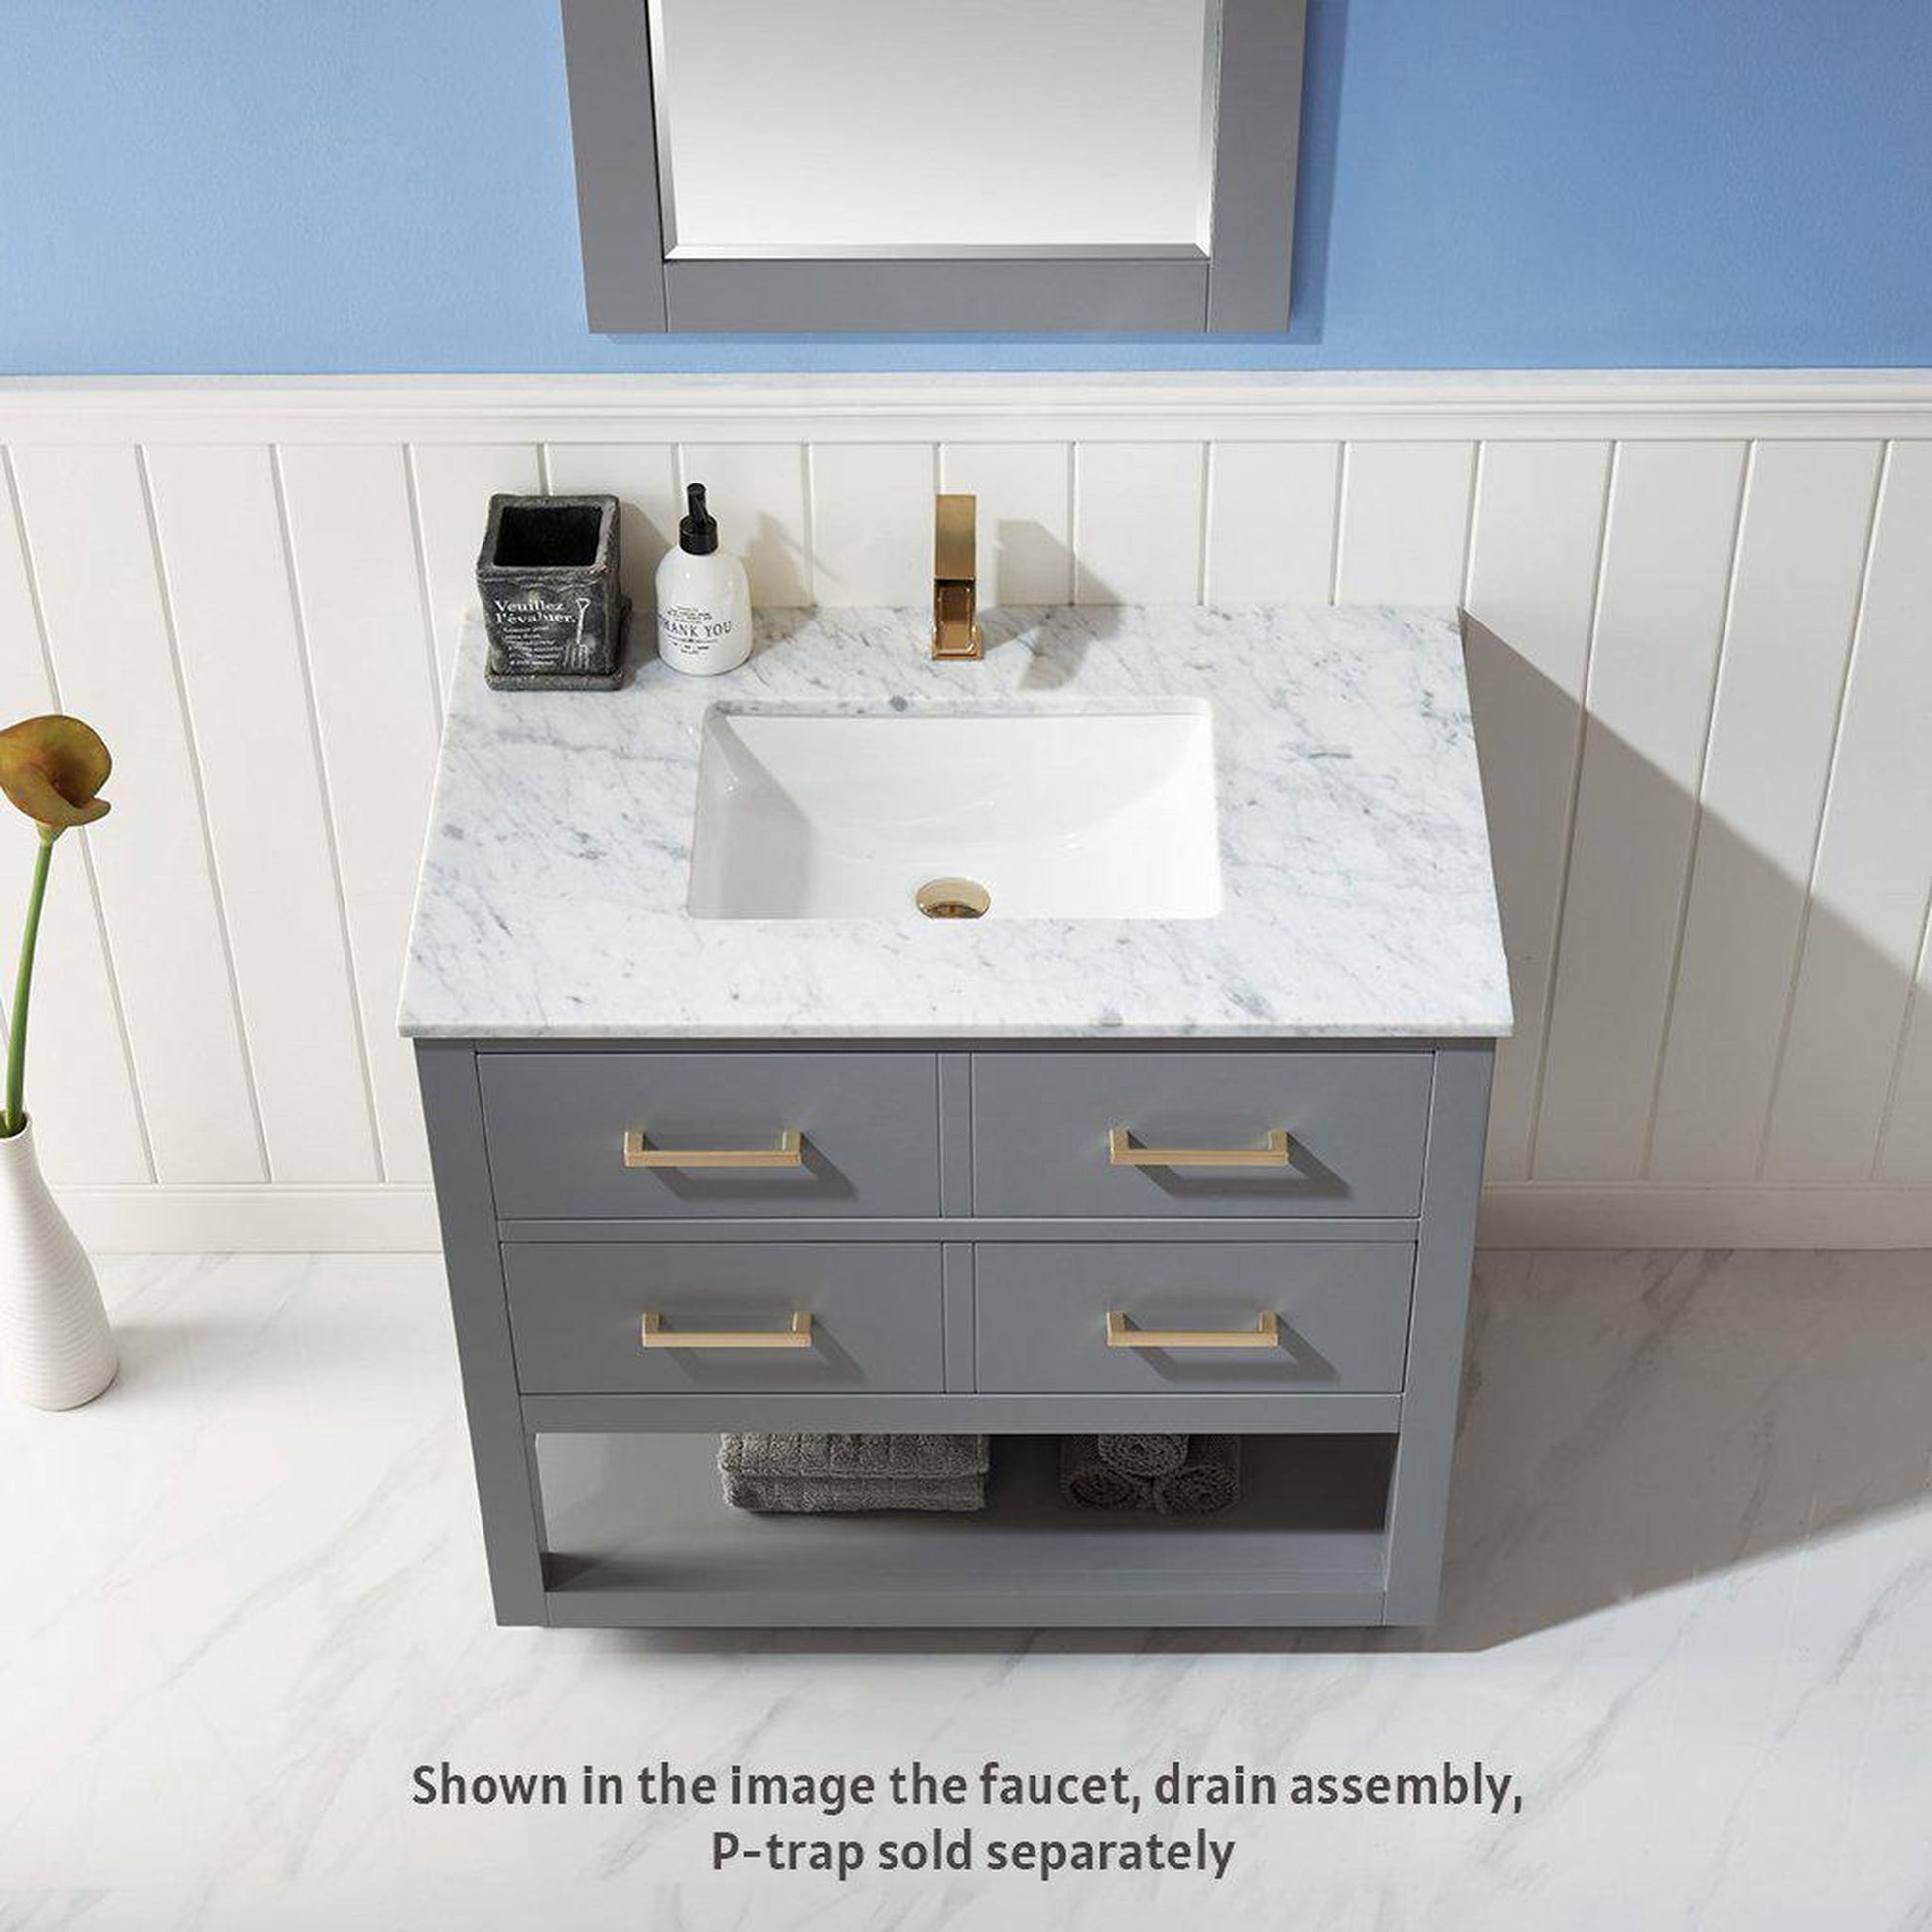 Altair Remi 36" Single Gray Freestanding Bathroom Vanity Set With Mirror, Natural Carrara White Marble Top, Rectangular Undermount Ceramic Sink, and Overflow